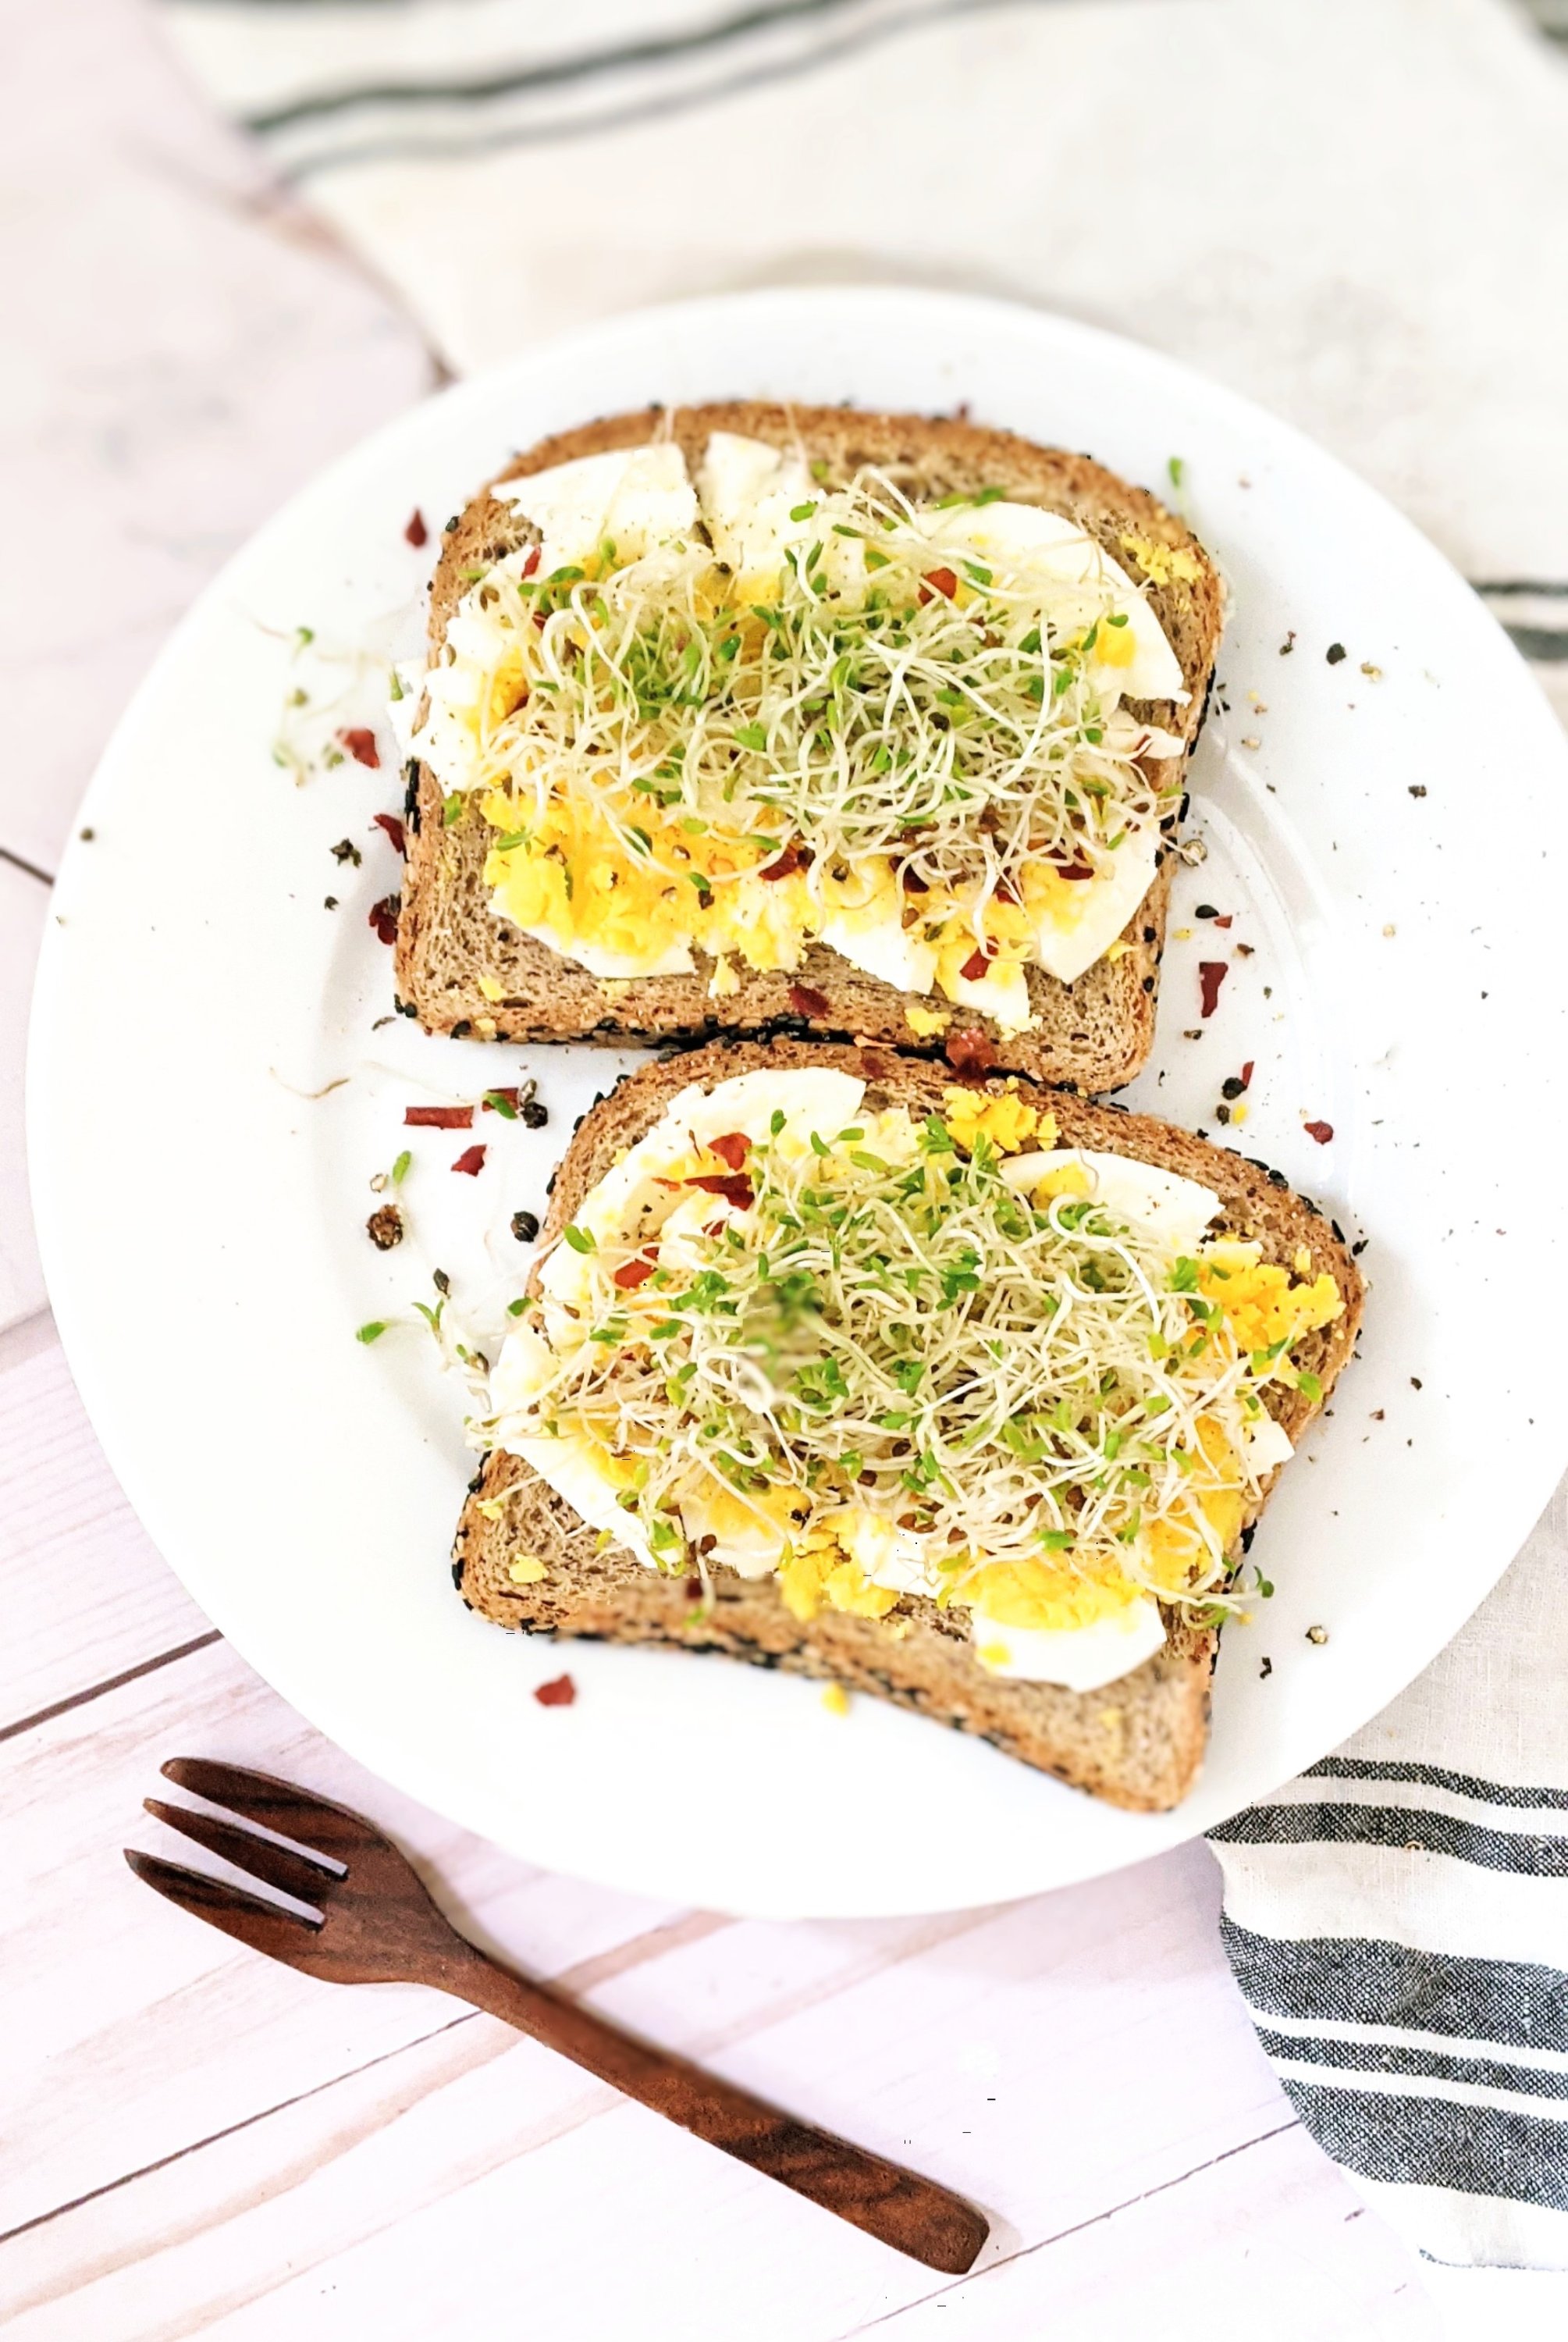 Keto Smashed Egg Sandwich Recipe (Low Carb, High Protein)